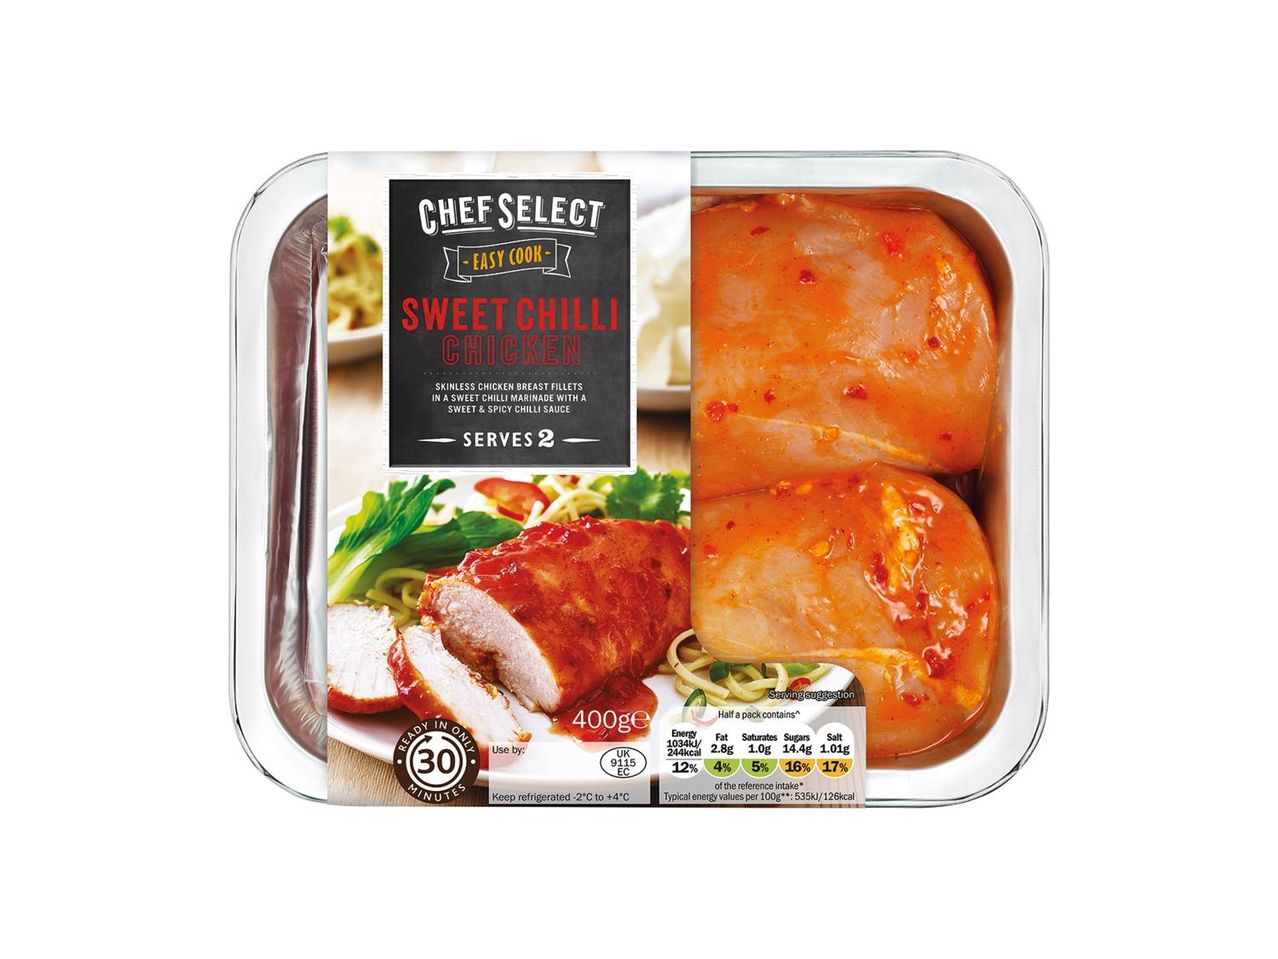 Go to full screen view: Chef Select Sweet Chilli Chicken - Image 1